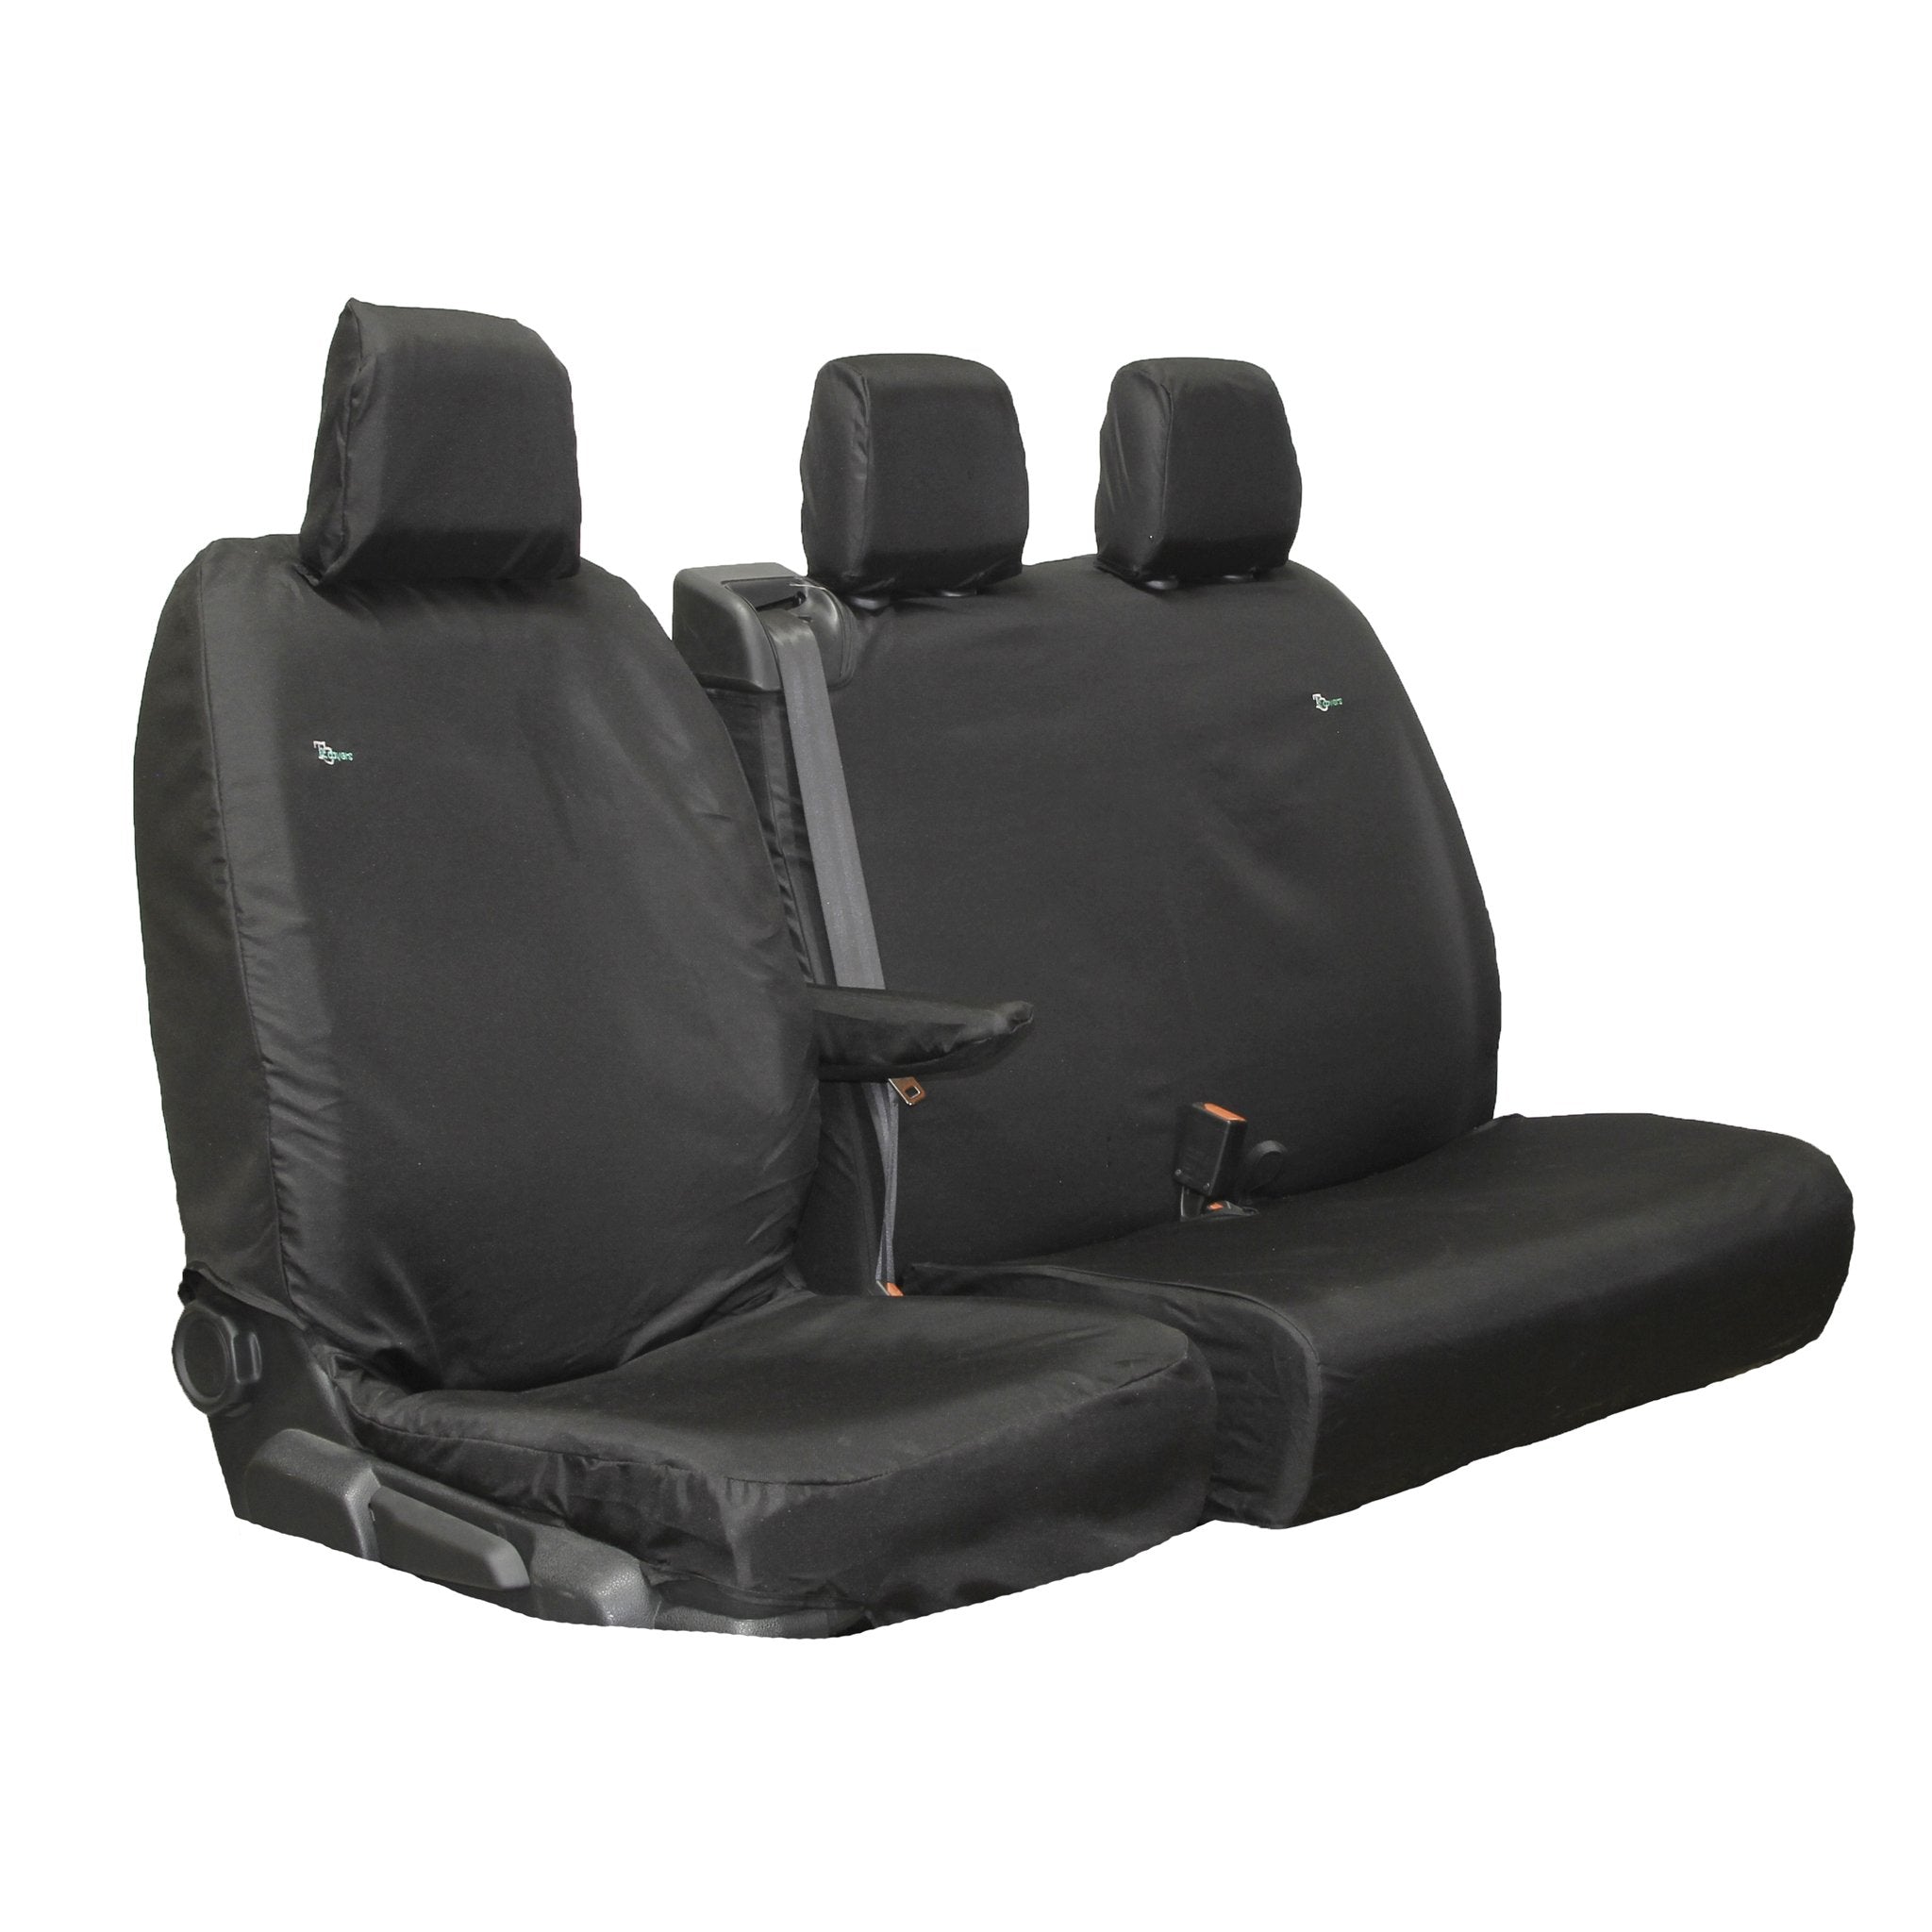 Toyota Proace Seat Covers (2016 onwards)